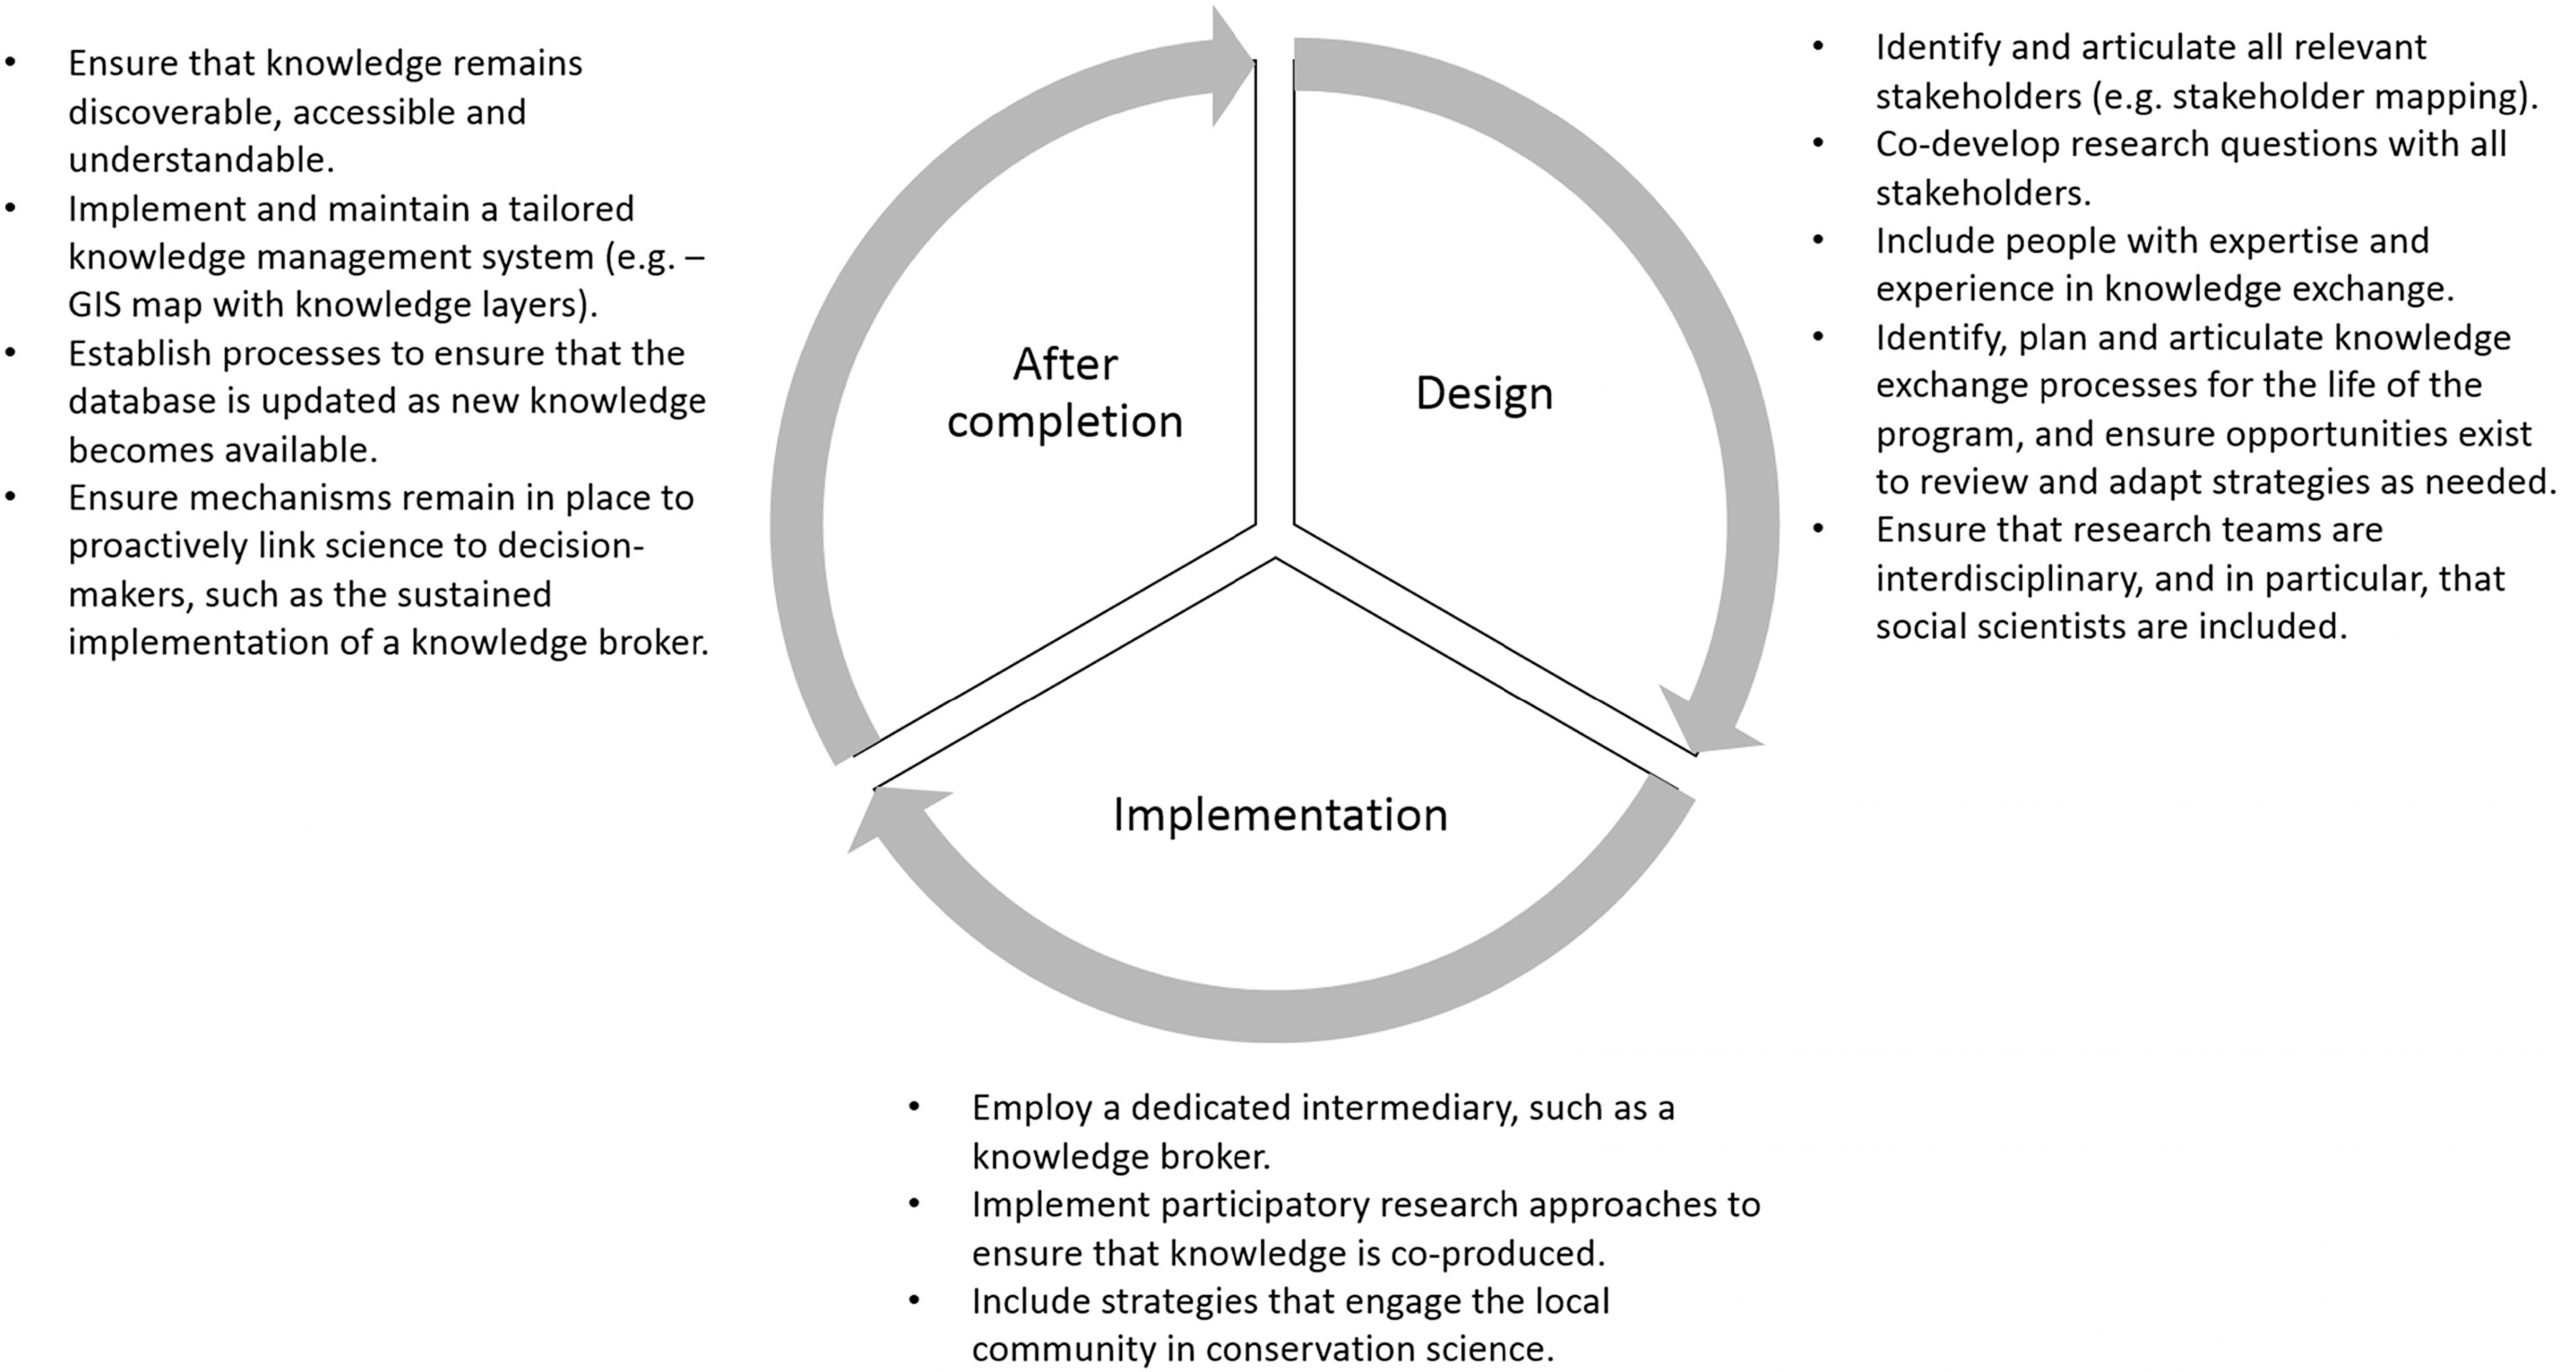 Three research phases for improving knowledge exchange: Design, implementation, and after completion